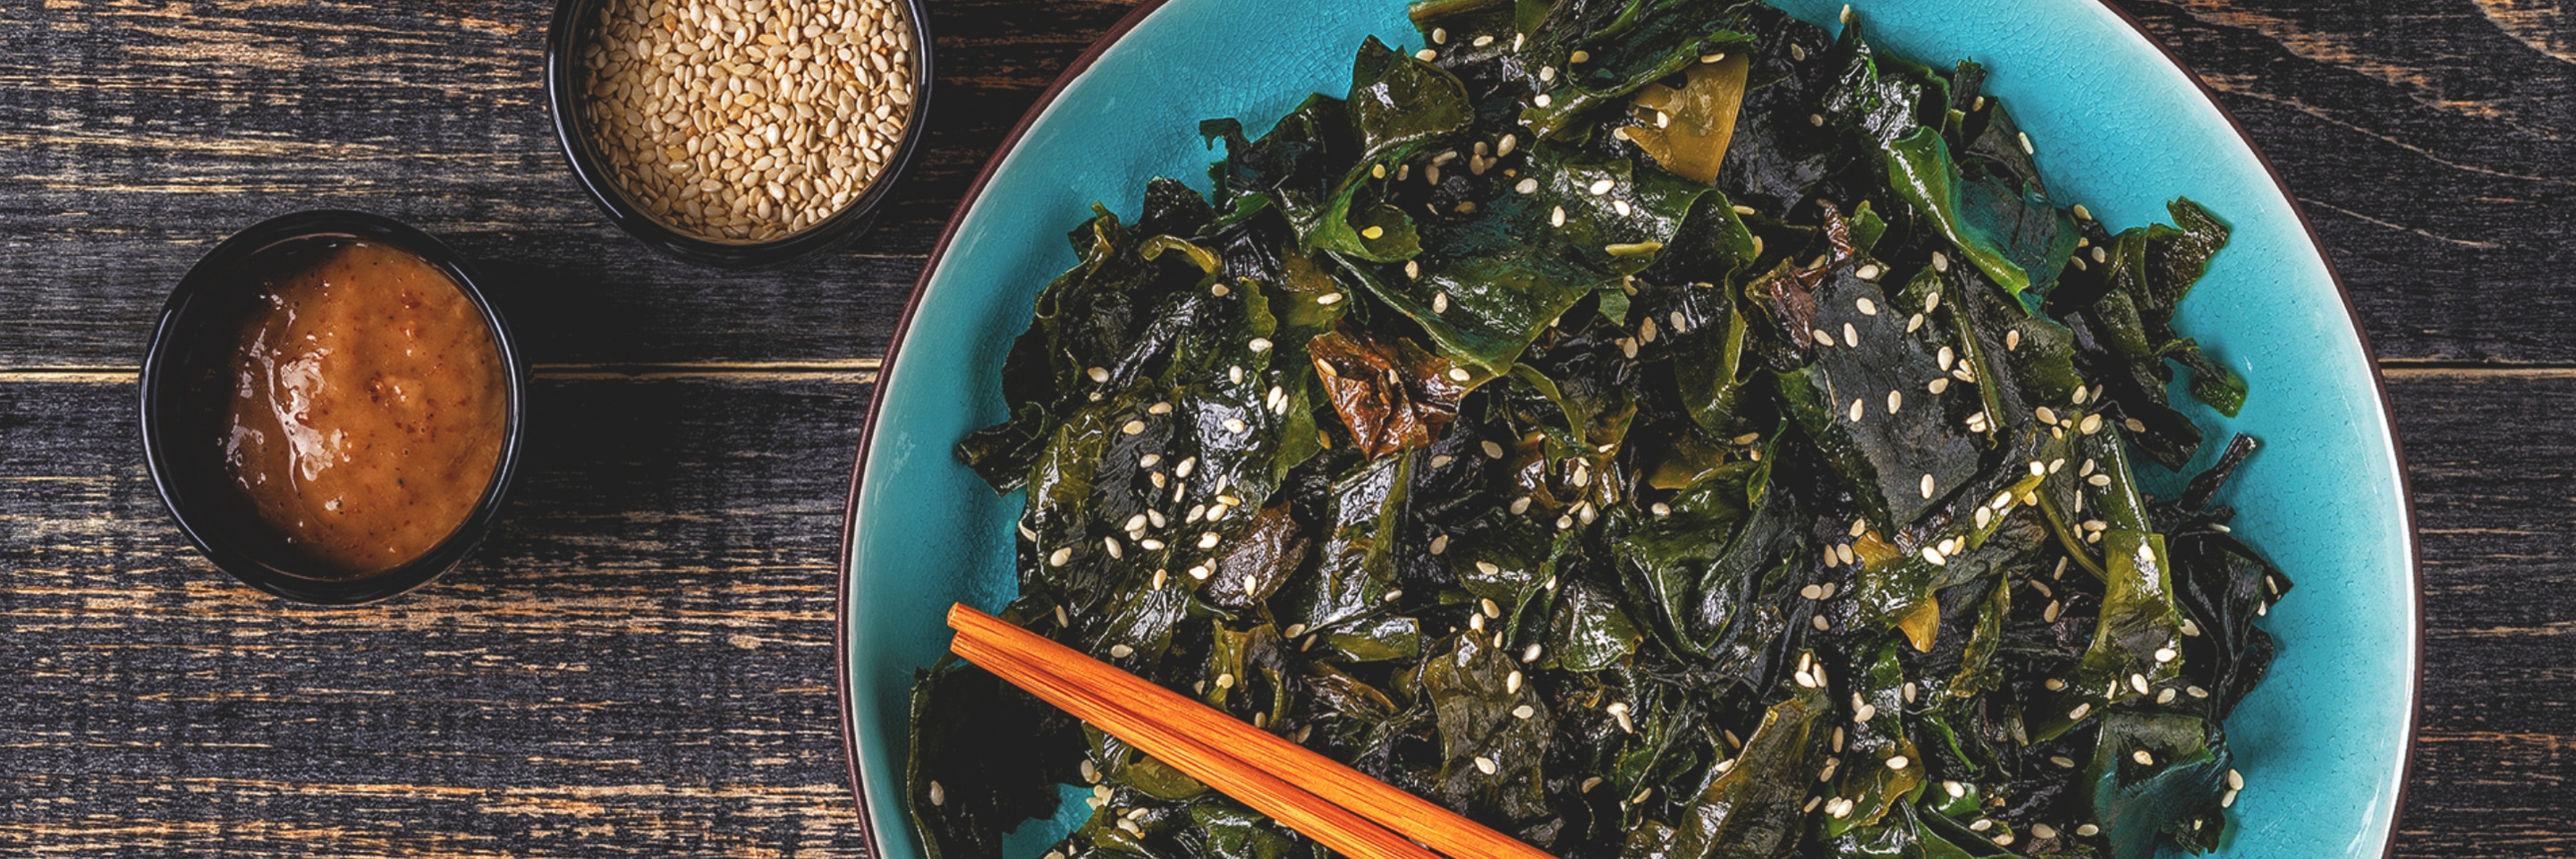 Getting to know seaweed with Knorr